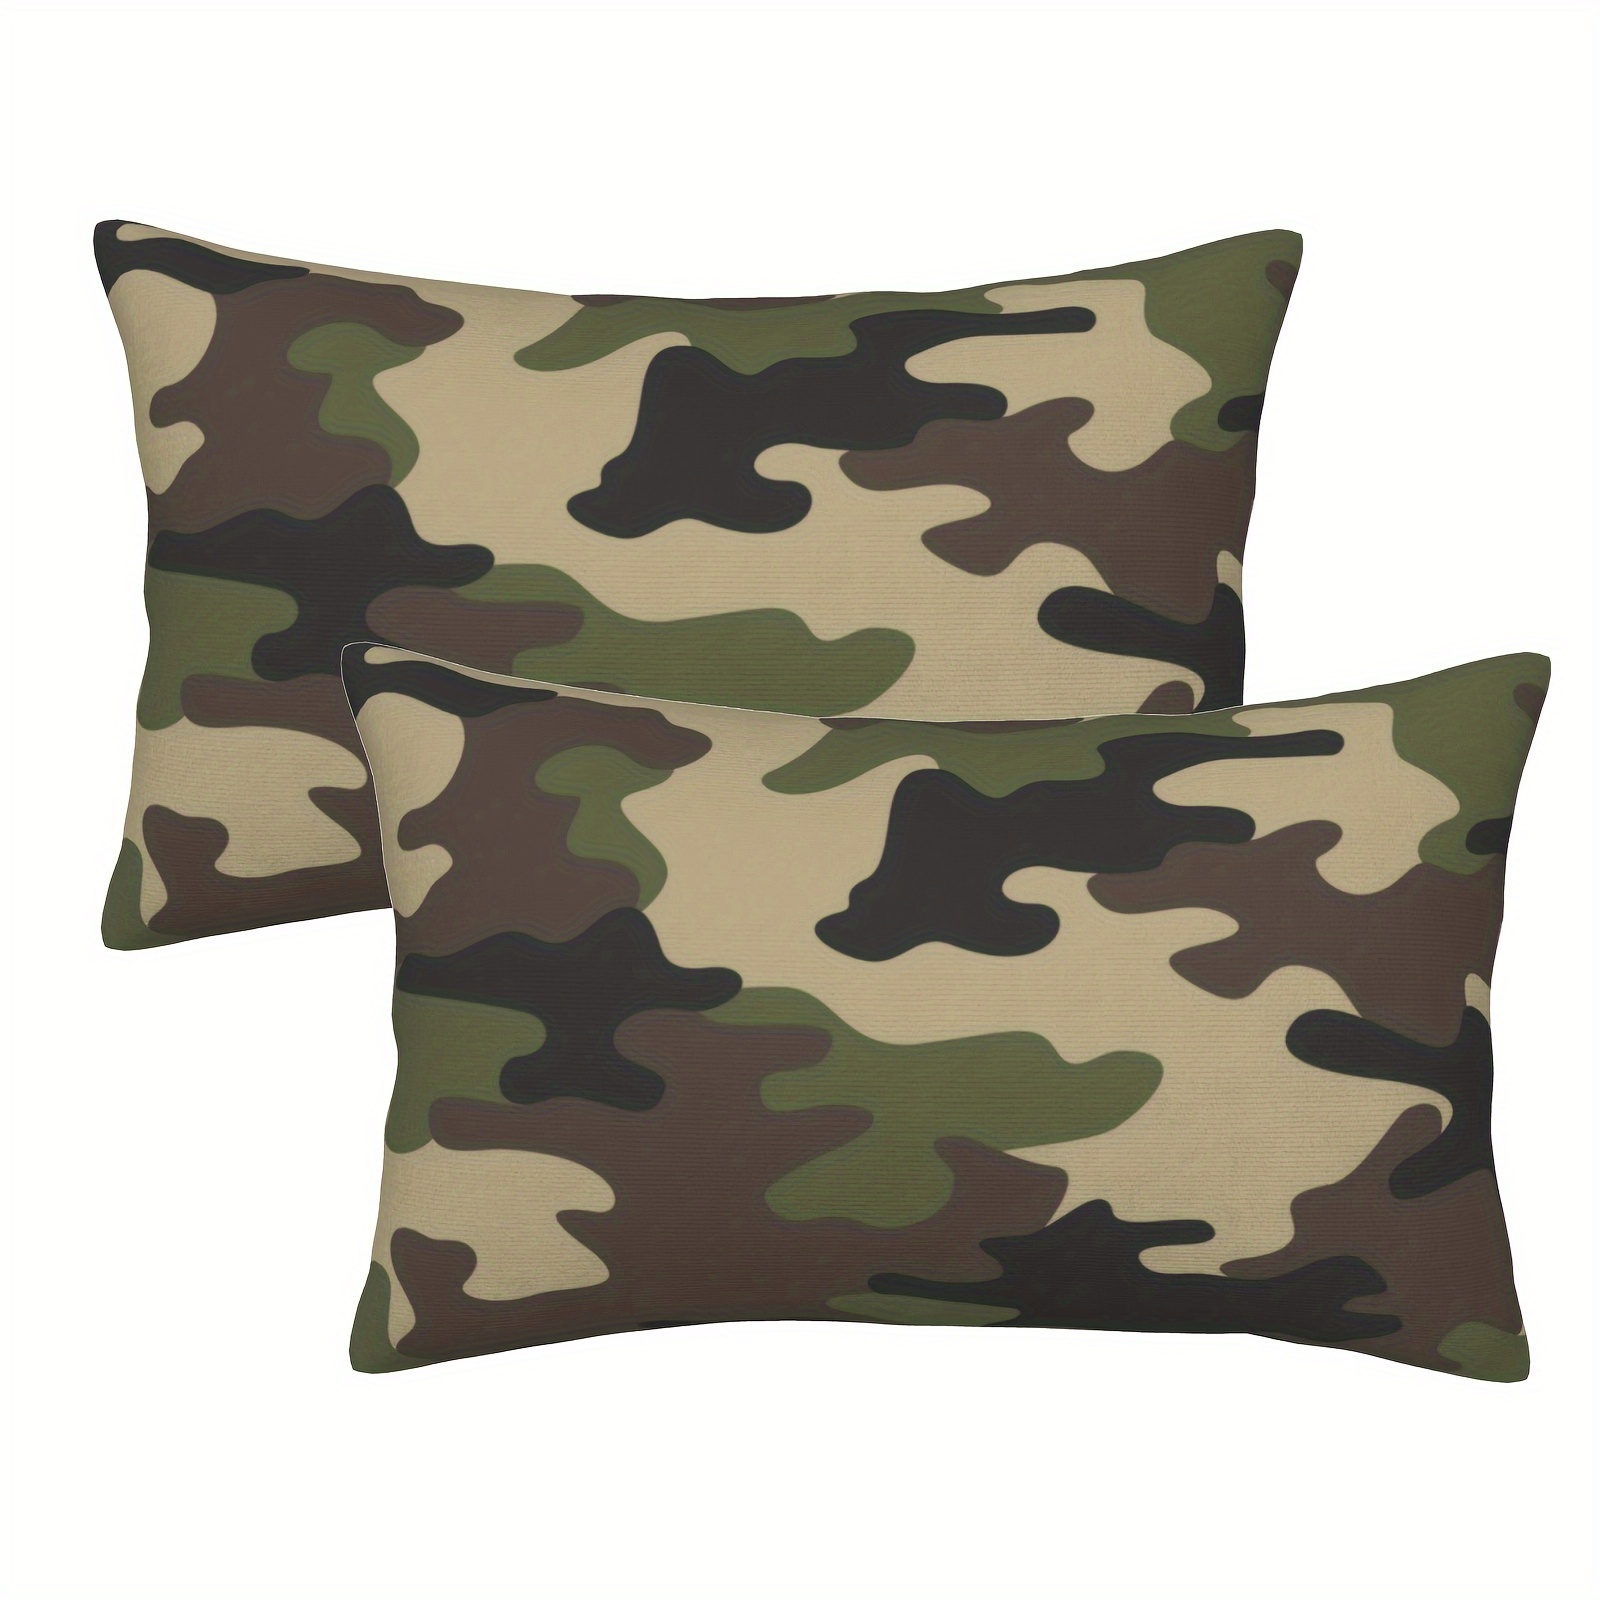 

2-pack Short Plush Camouflage Pattern Lumbar Pillow Covers 12x20 Inch, Military Combat Woodland Green Black, Vintage Rectangle Cushion Cases For Outdoor Couch Chair, No Pillow Insert